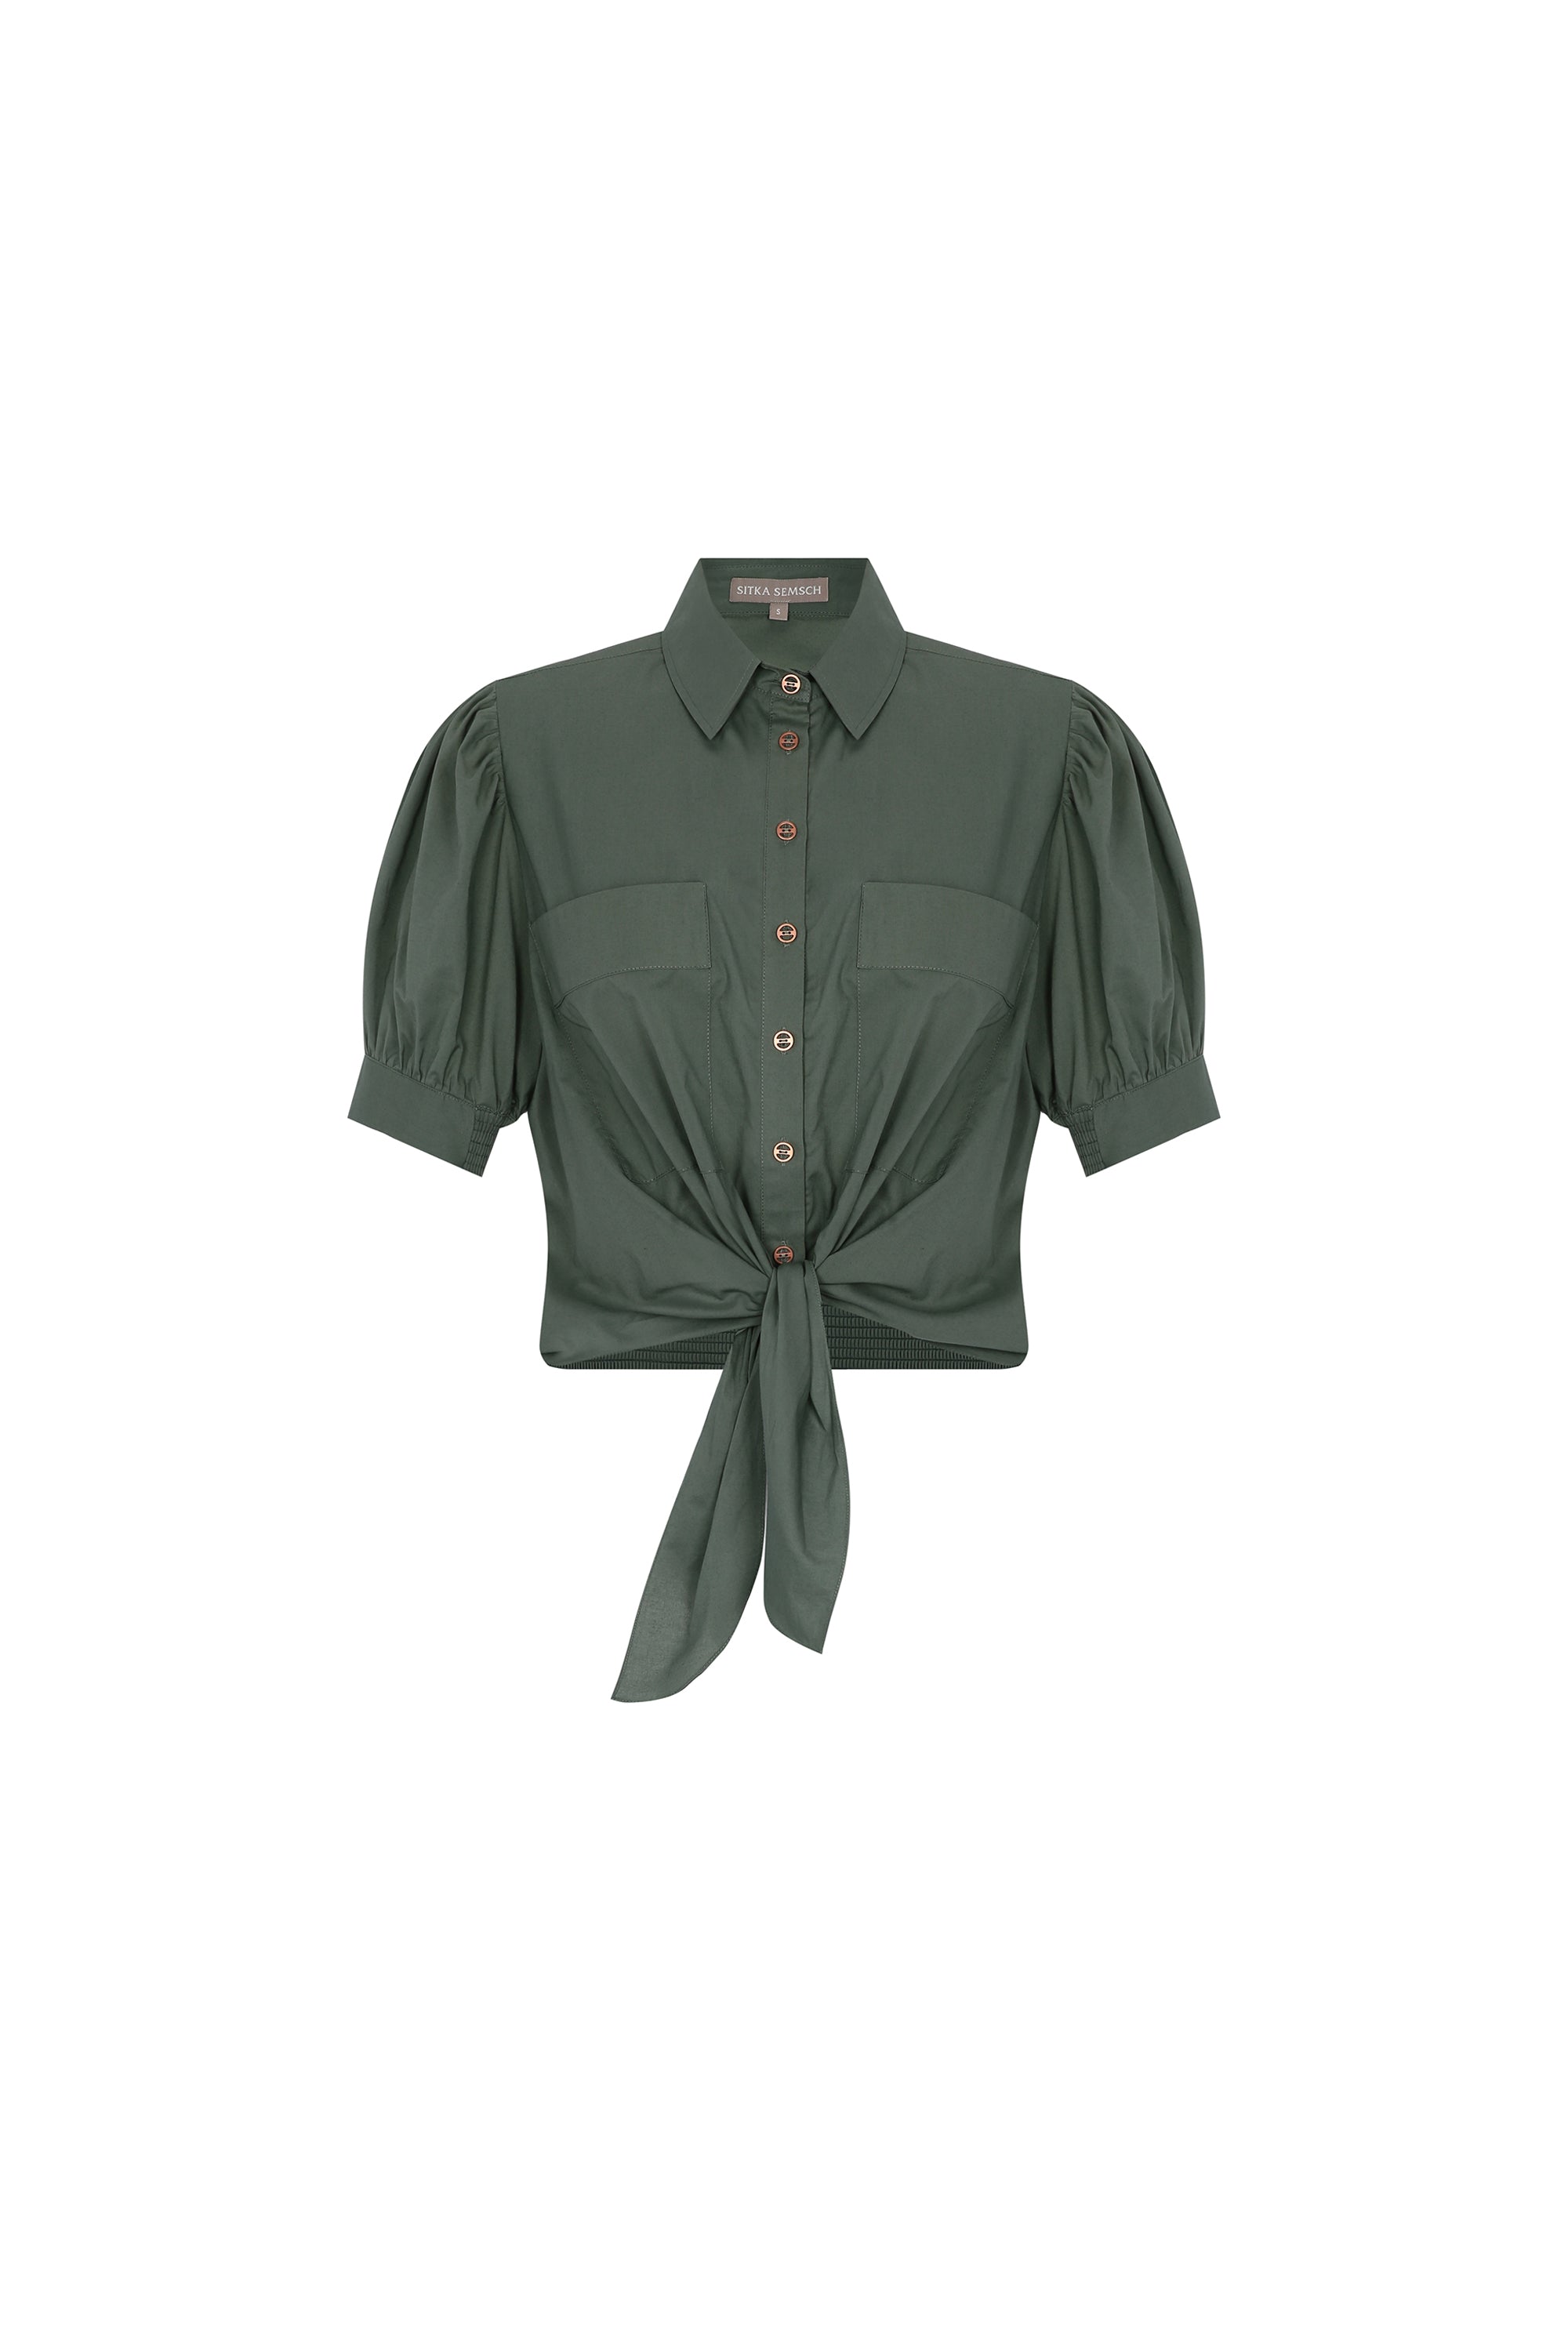 Josie Blouse in Military Green - Stylish Bubble Sleeve Cotton Blouse with Copper Buttons